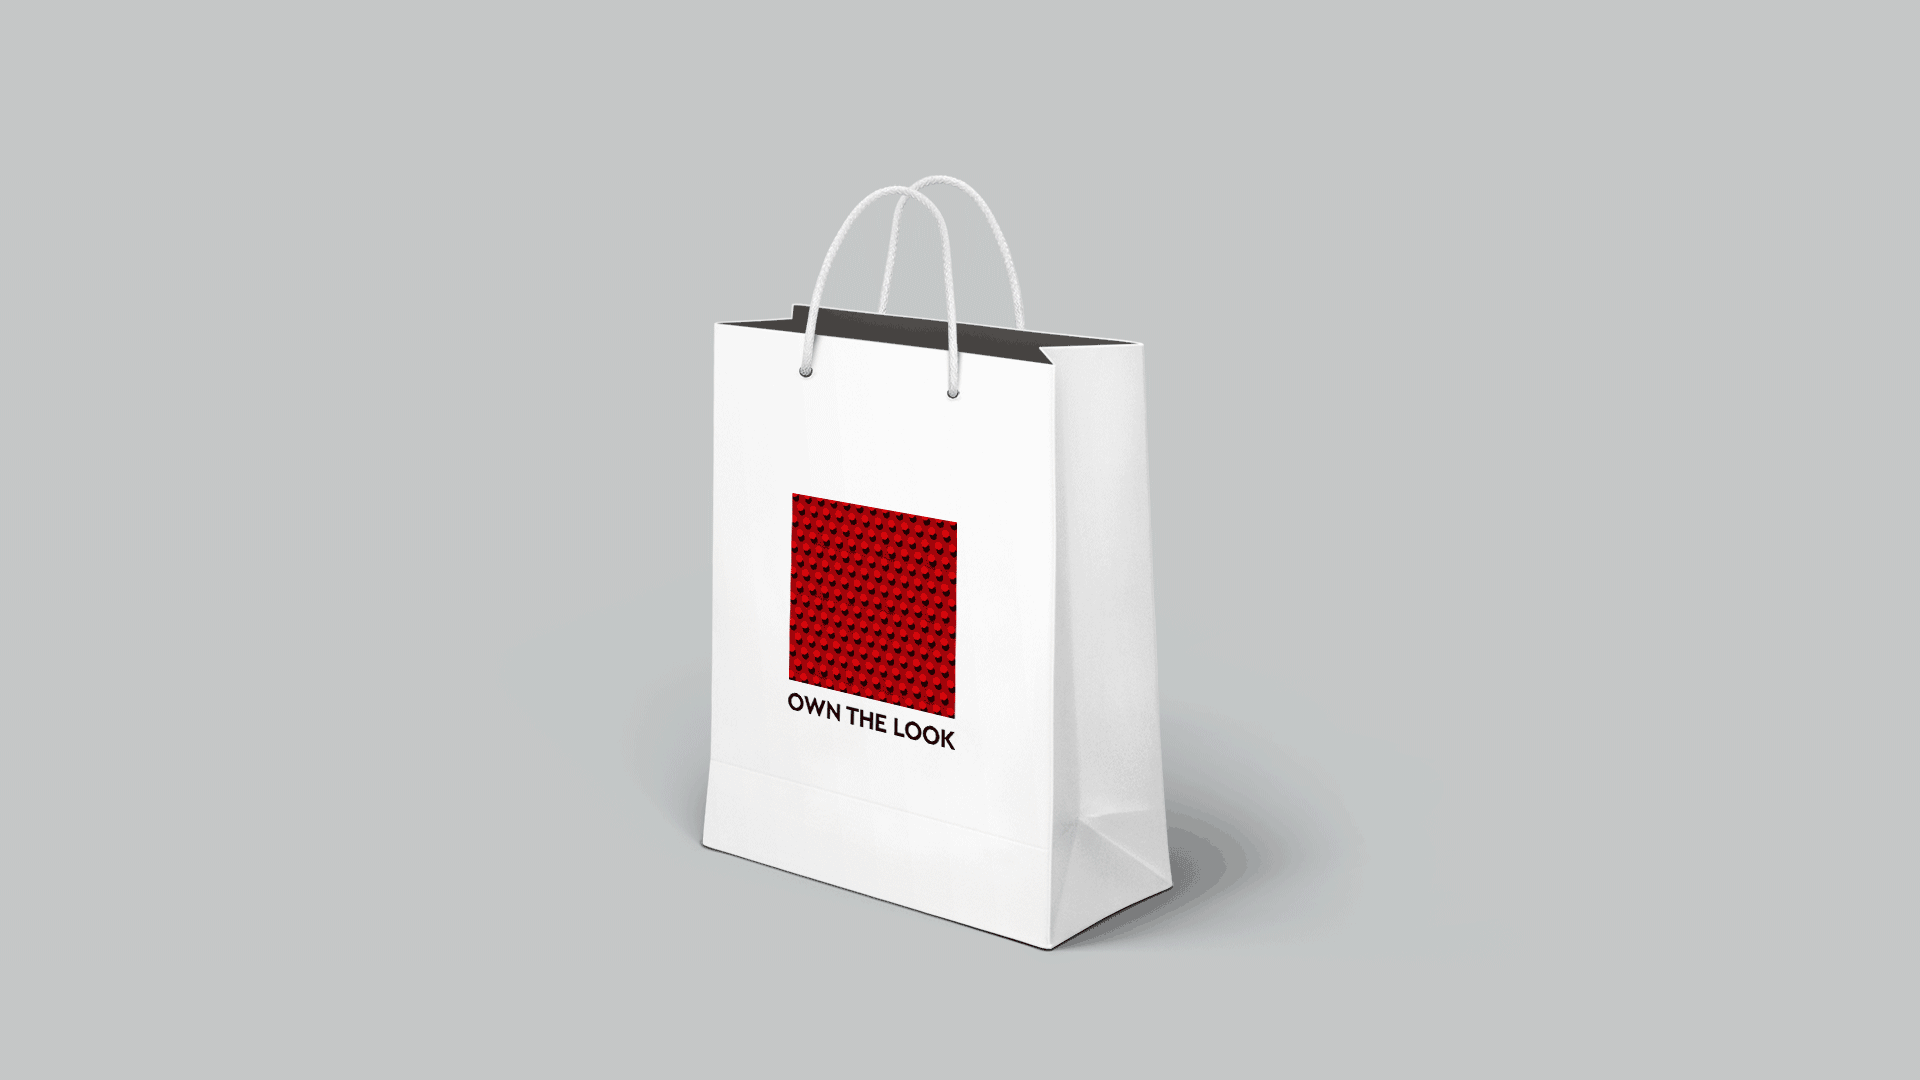 Edgars paper bag with own the look and various patterns masked into red square gif